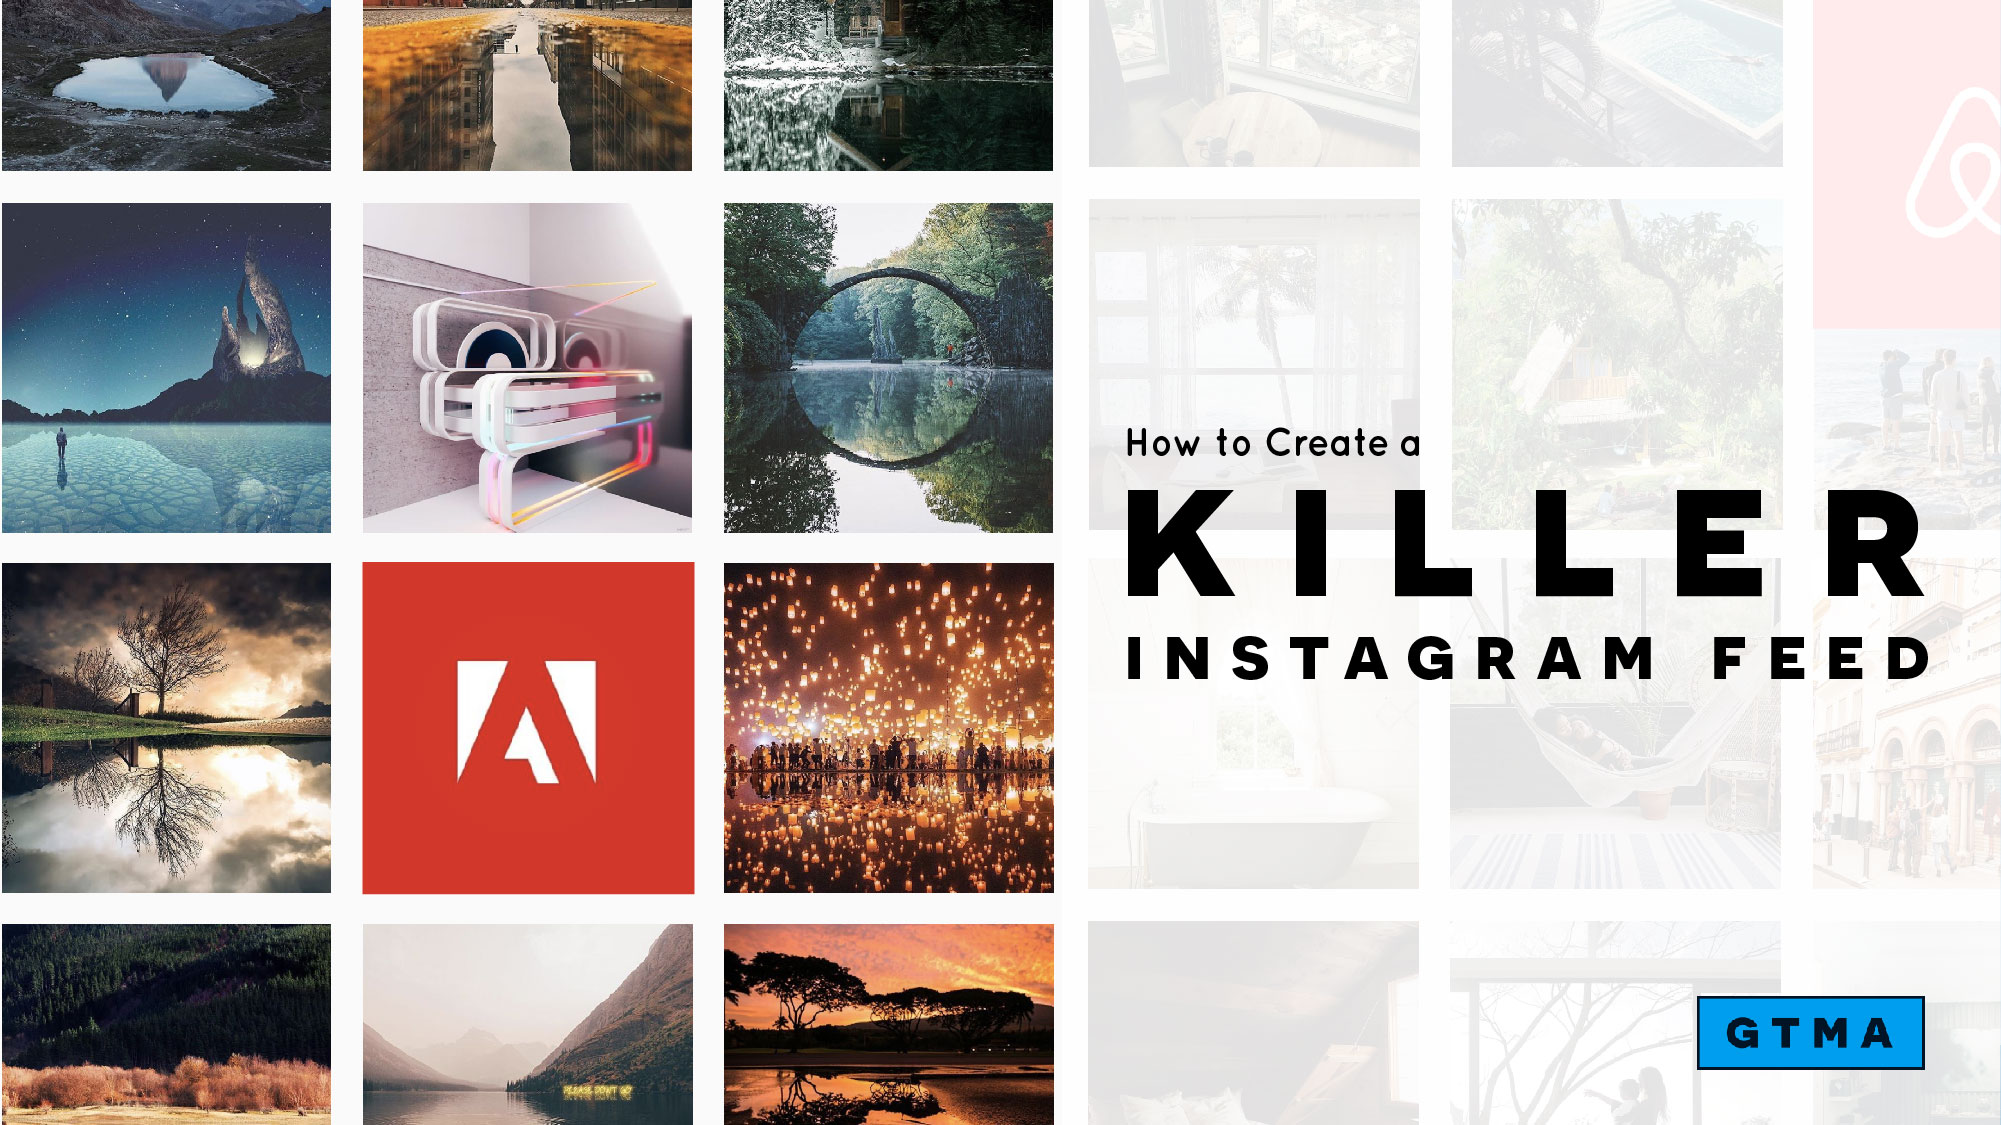 How to Create a Killer Instagram Feed